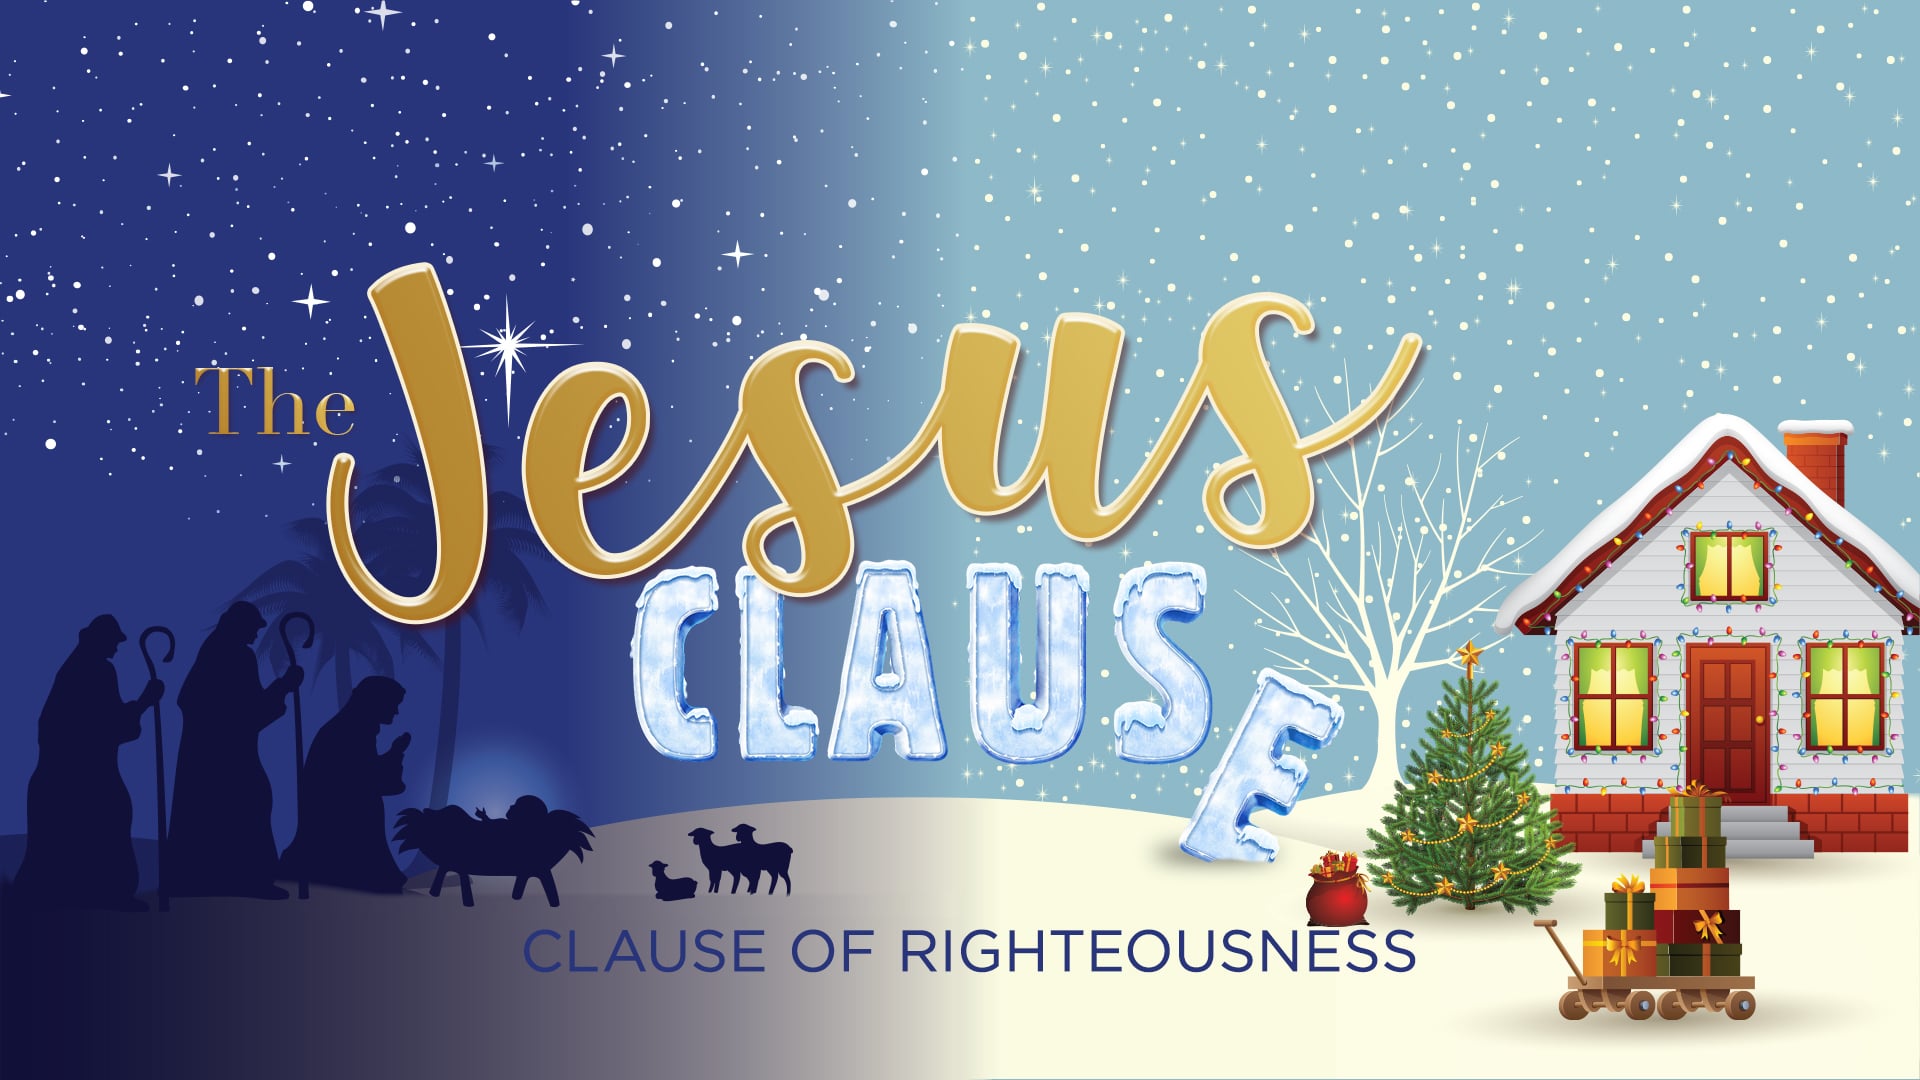 Clause of Righteousness